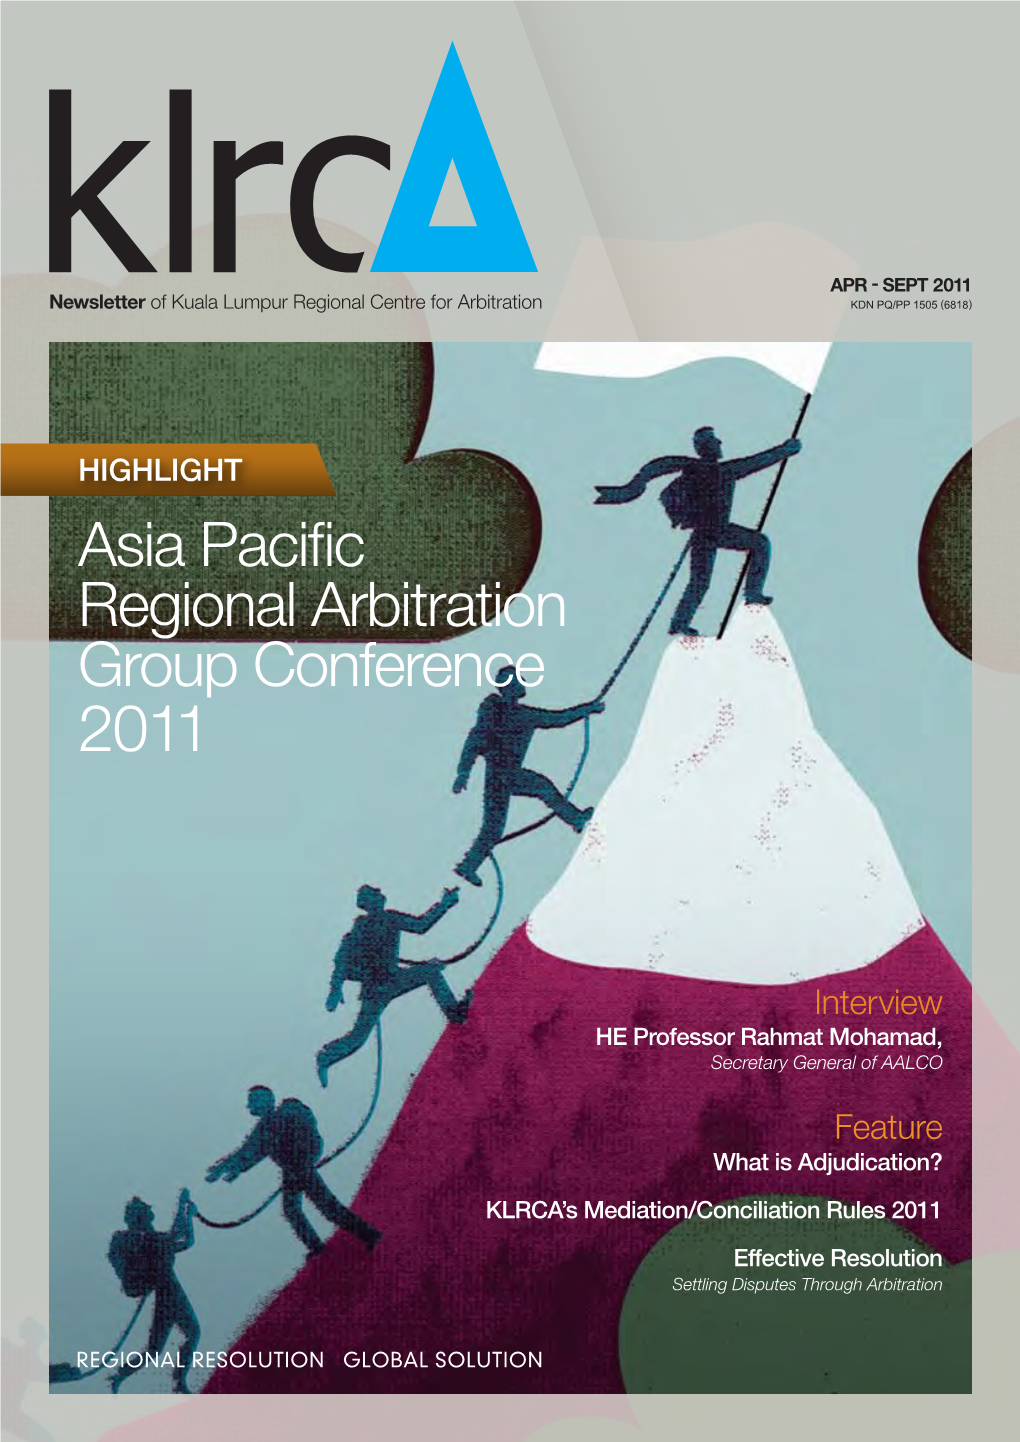 Asia Pacific Regional Arbitration Group Conference 2011